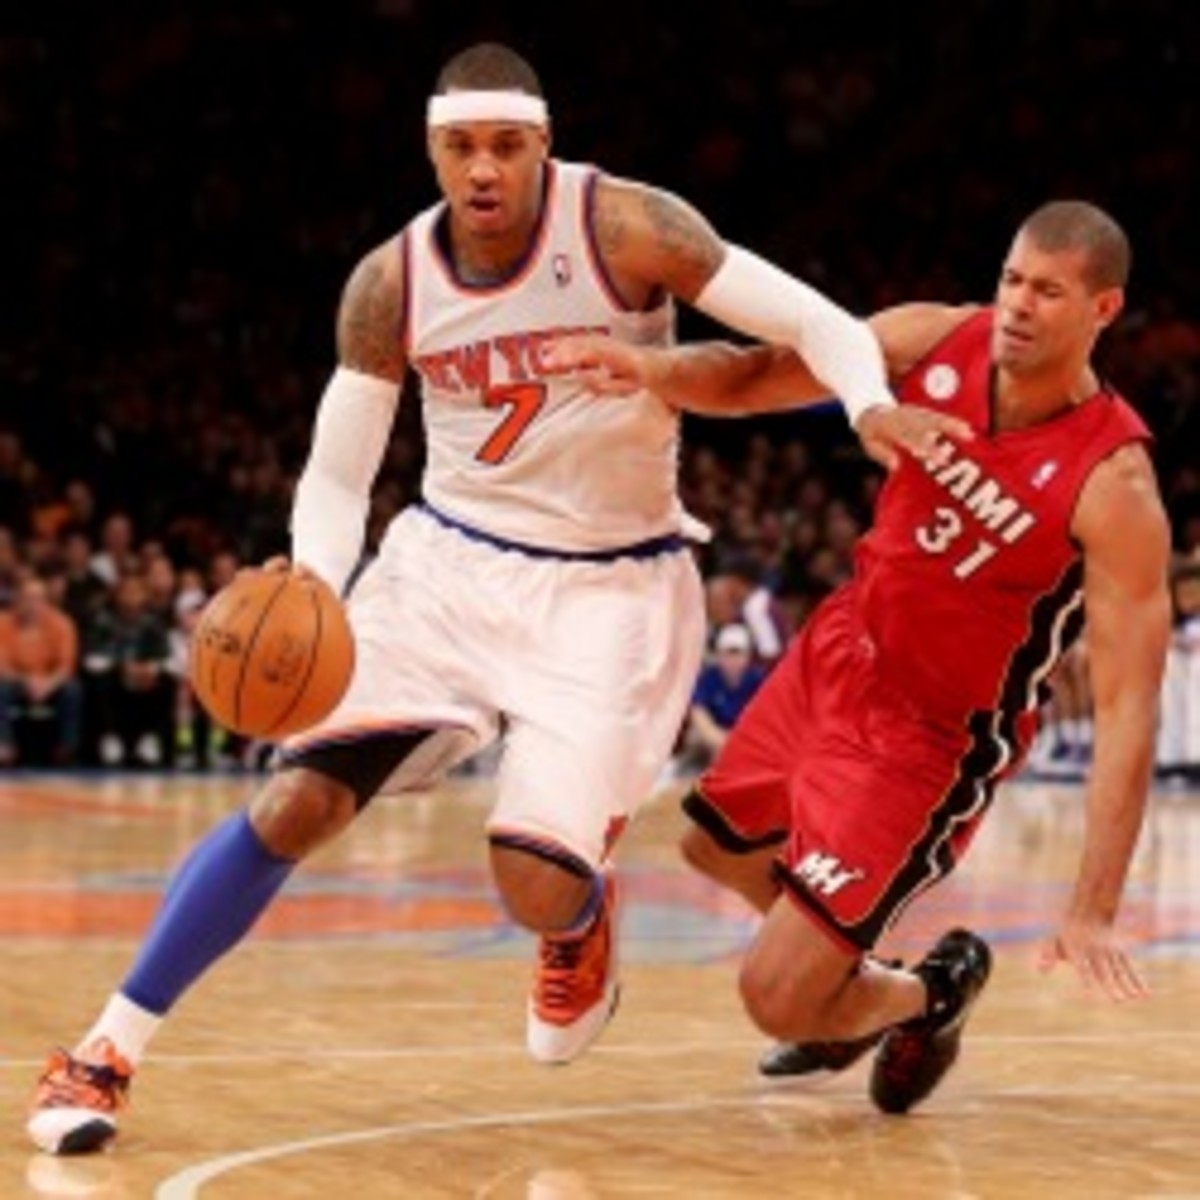 Carmelo Anthony #7 of the New York Knicks drives past a falling Shane Battier #31. (Photo by Nick Laham/Getty Images)